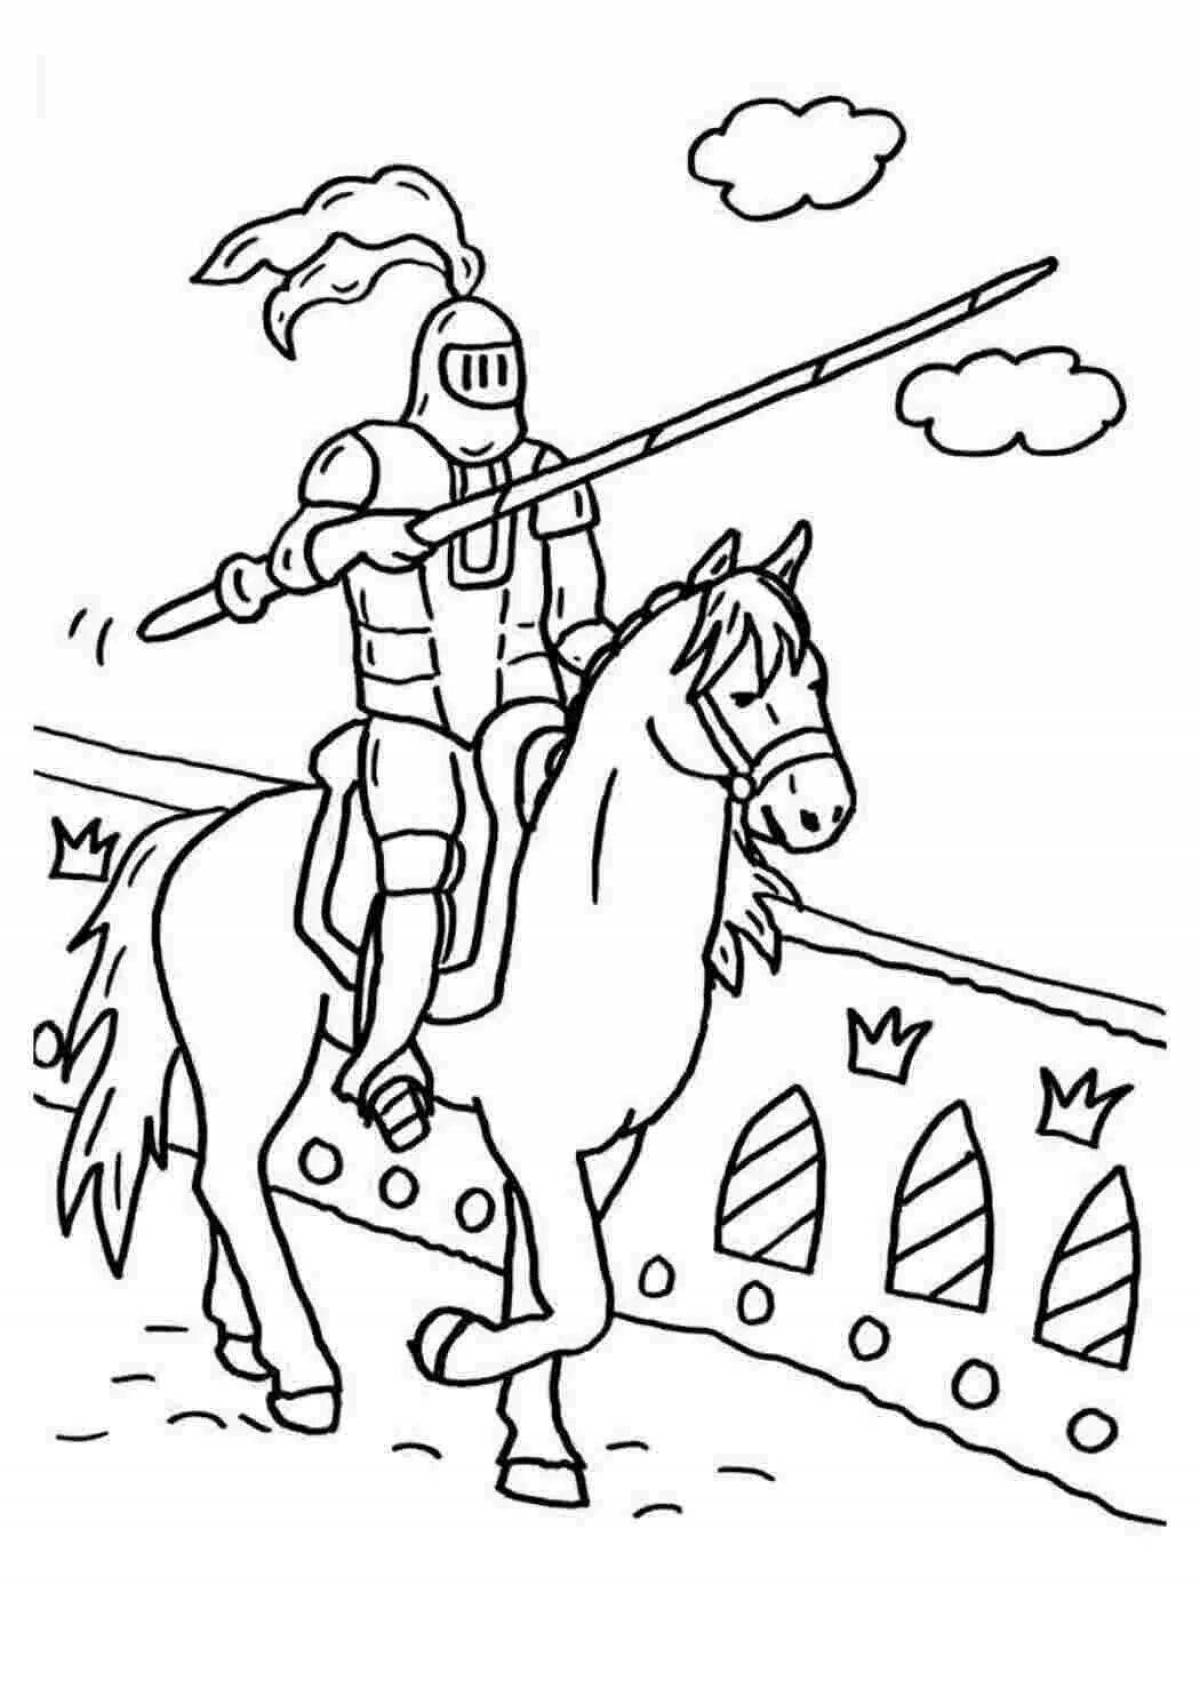 Adorable coloring book for knight boys